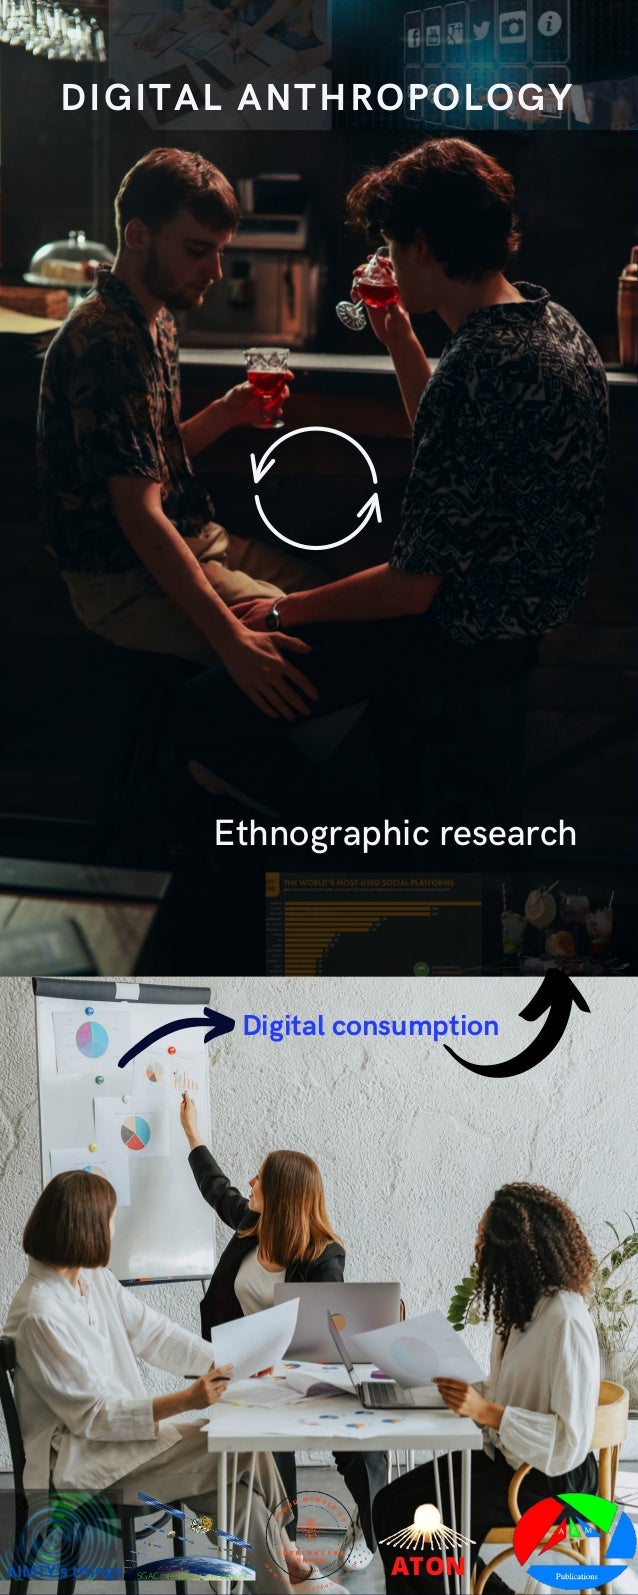 Ethnographic research
DIGITAL ANTHROPOLOGY
Digital consumption
ATON
SGAC interplanetary network
AIMTY's things
 